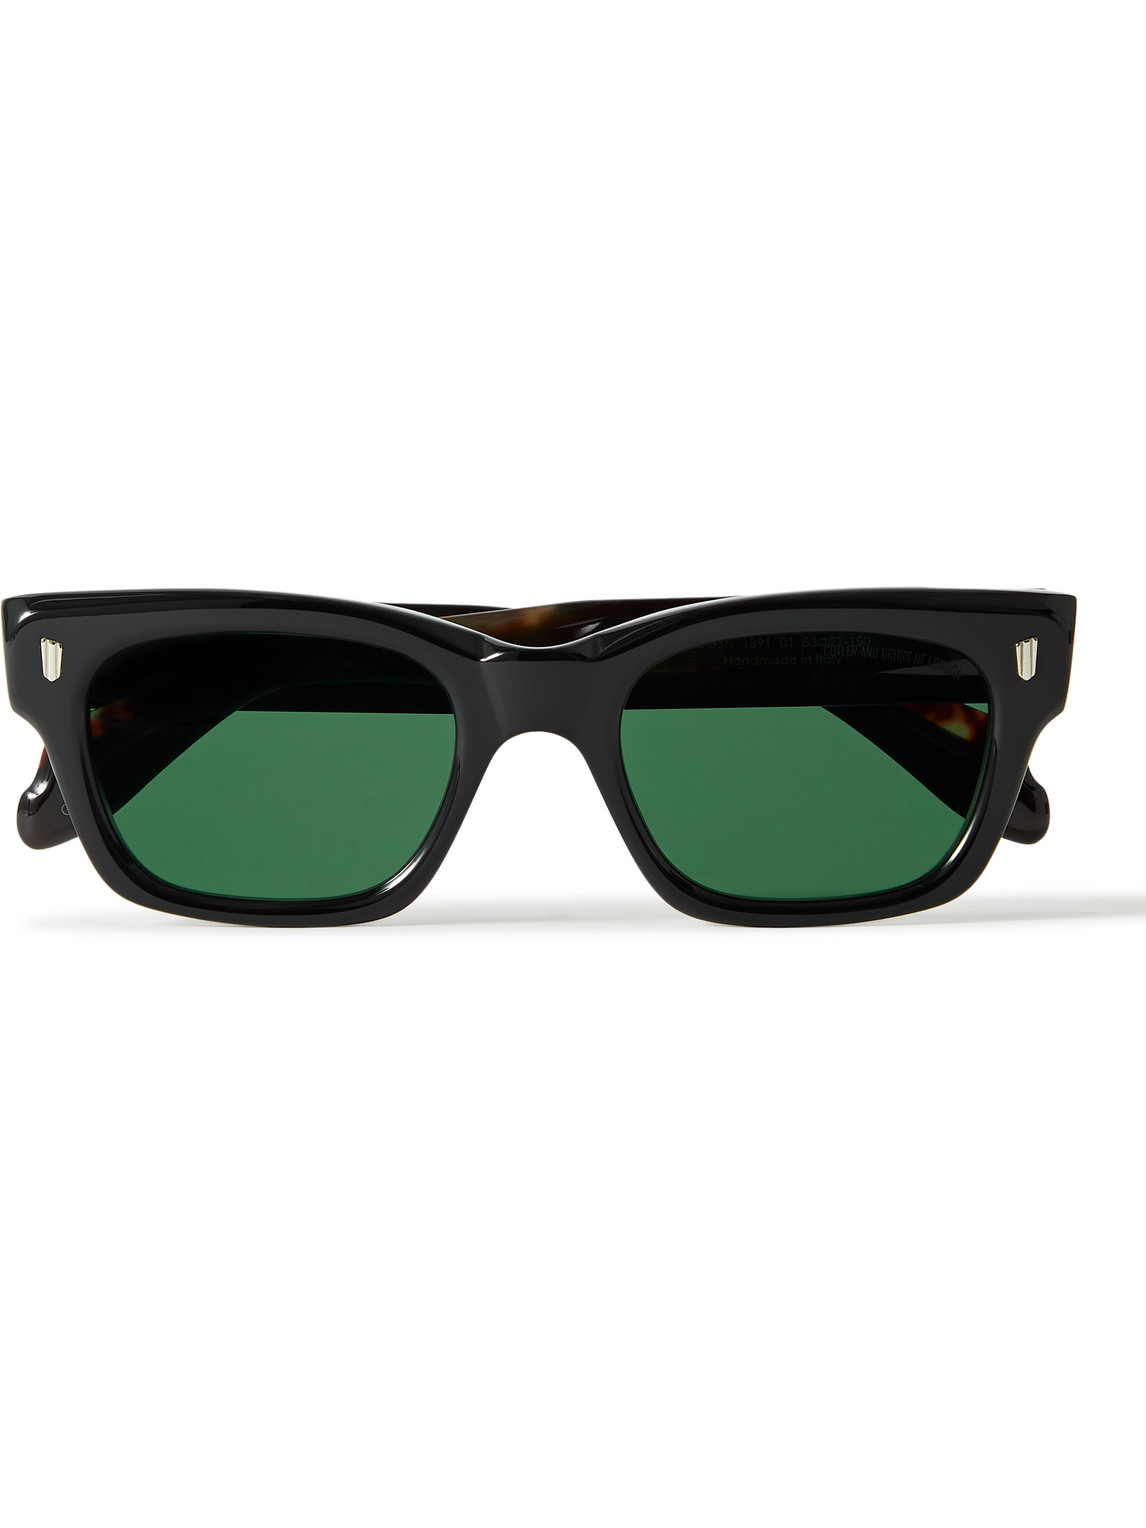 CUTLER AND GROSS 1391 SQUARE-FRAME ACETATE SUNGLASSES